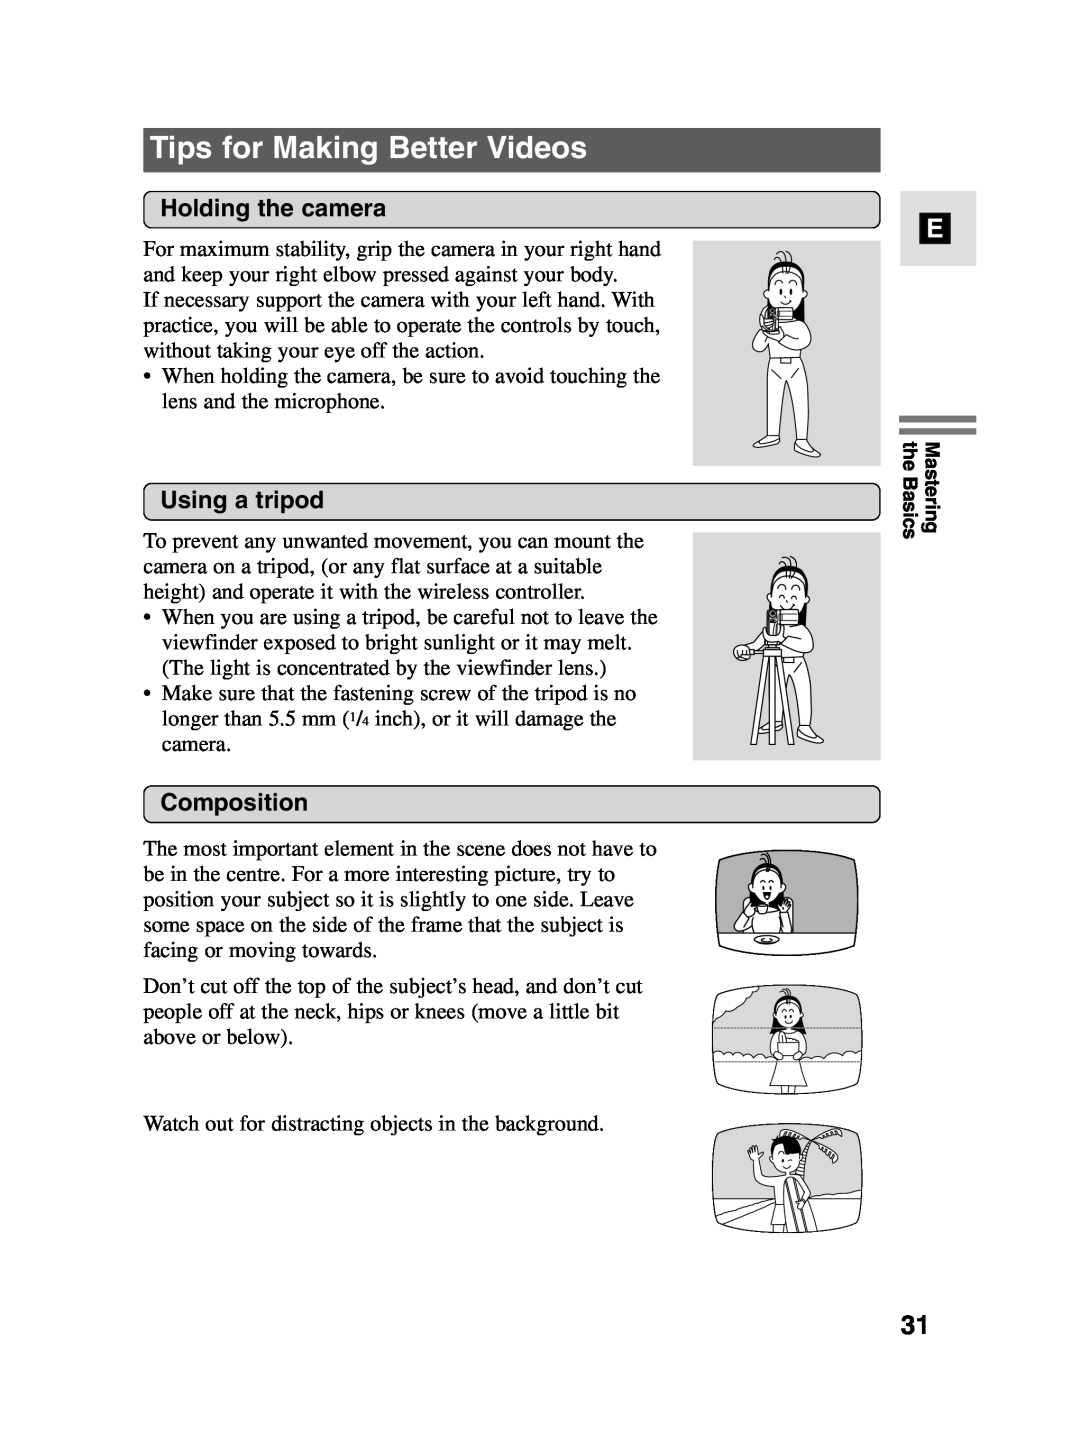 Canon MV4i MC instruction manual Tips for Making Better Videos, Holding the camera, Using a tripod, Composition 